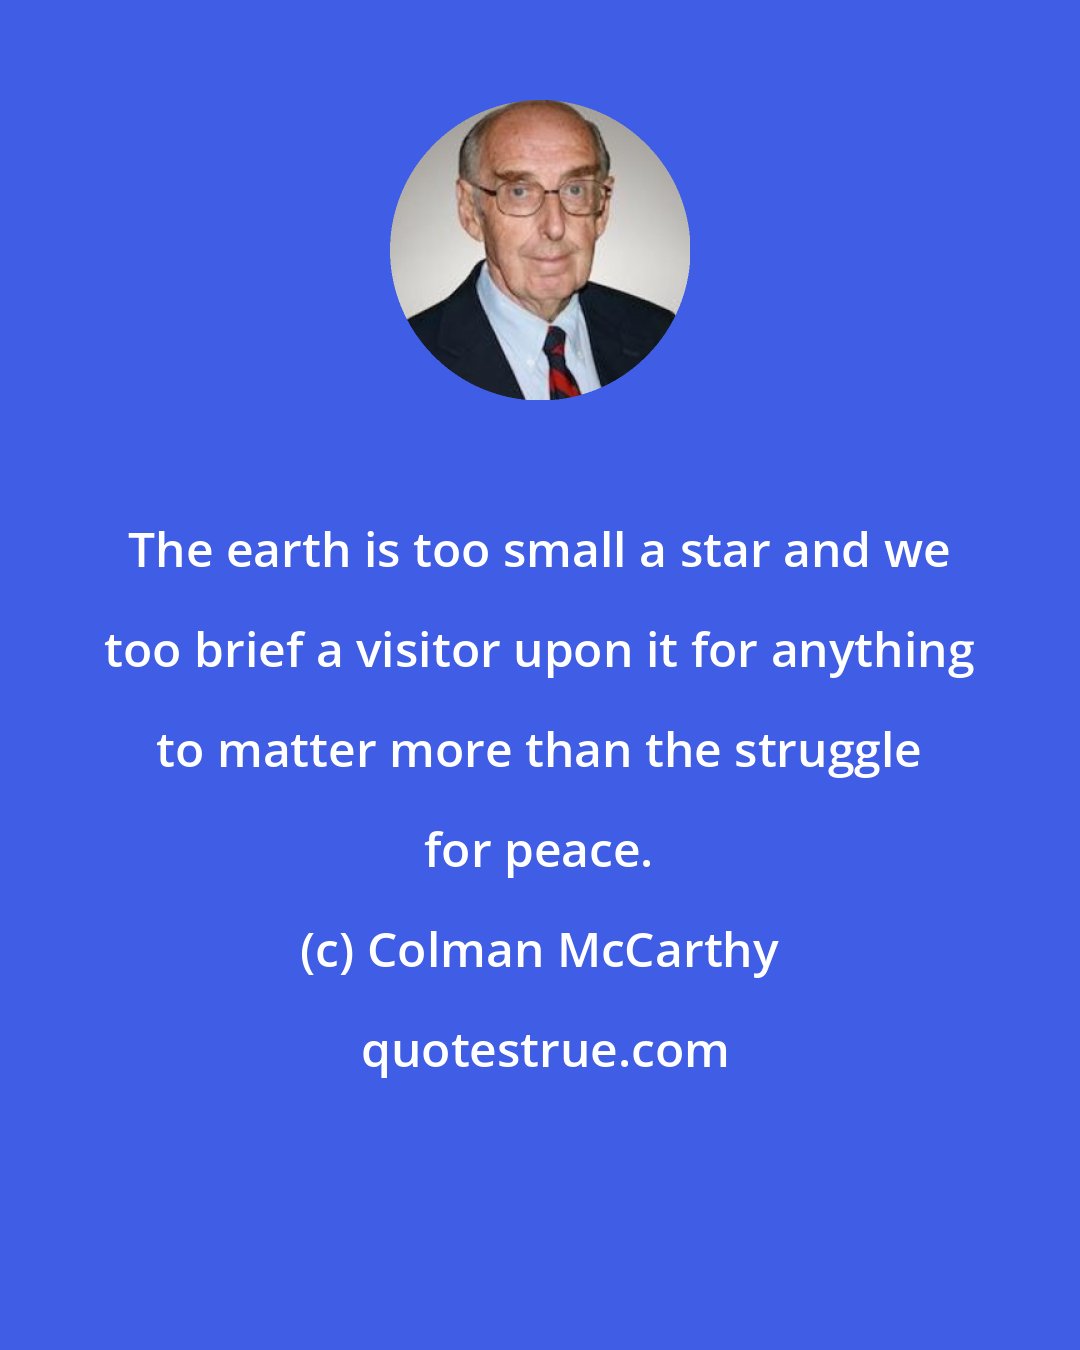 Colman McCarthy: The earth is too small a star and we too brief a visitor upon it for anything to matter more than the struggle for peace.